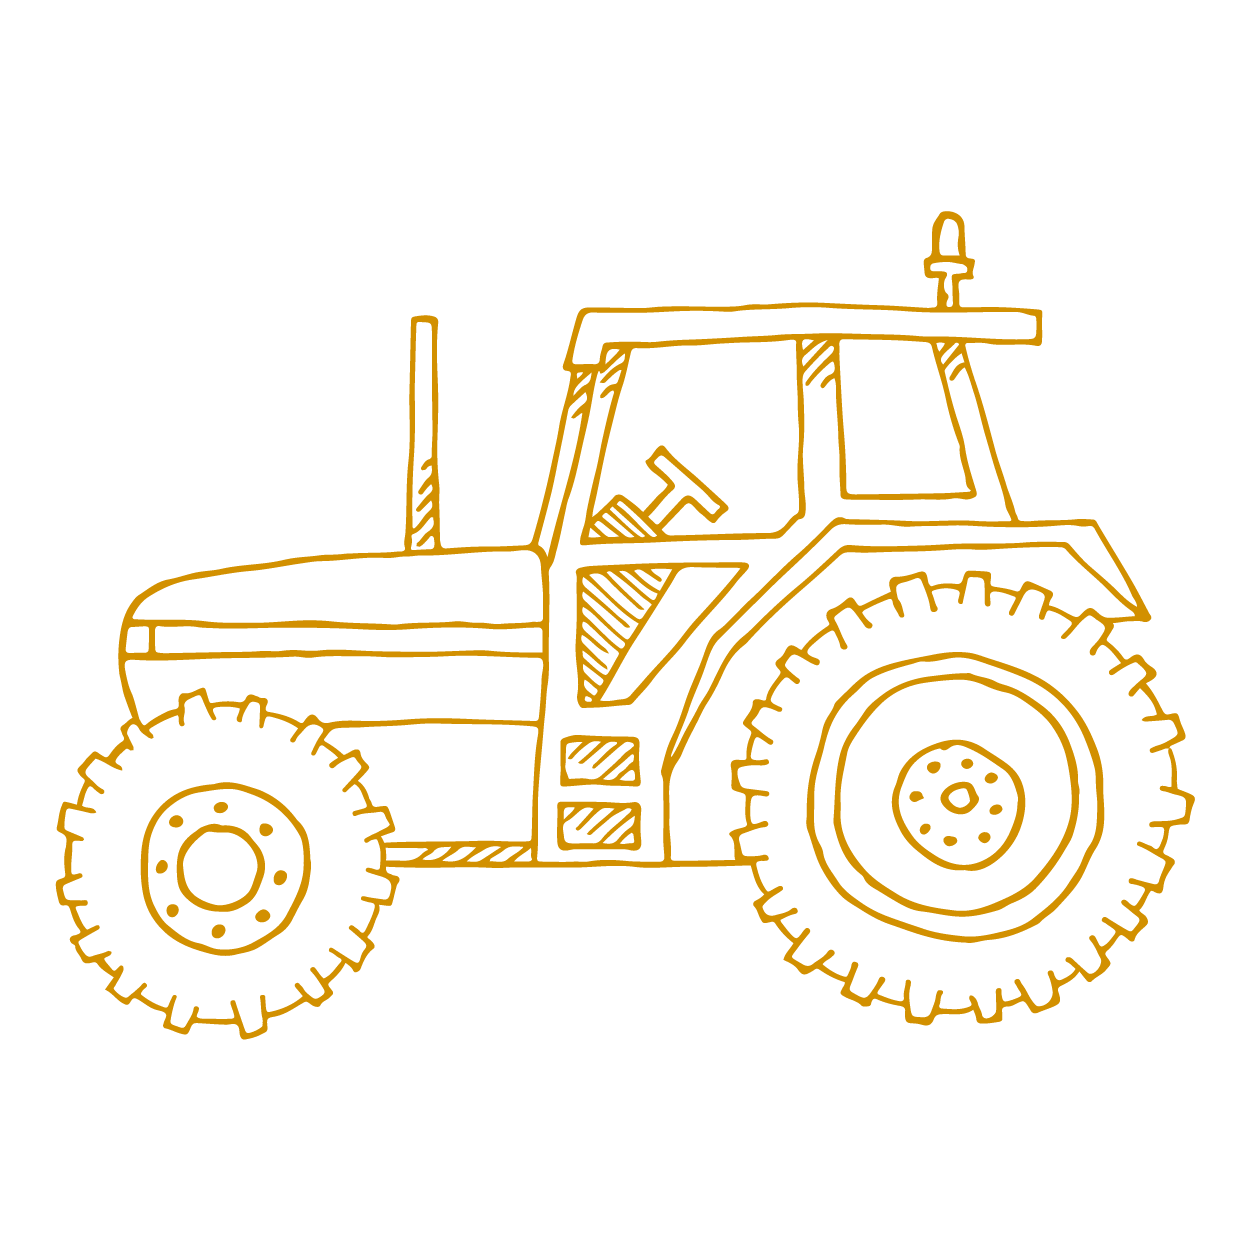 The Cornish Oven Gold Line Illustrations_Tractor